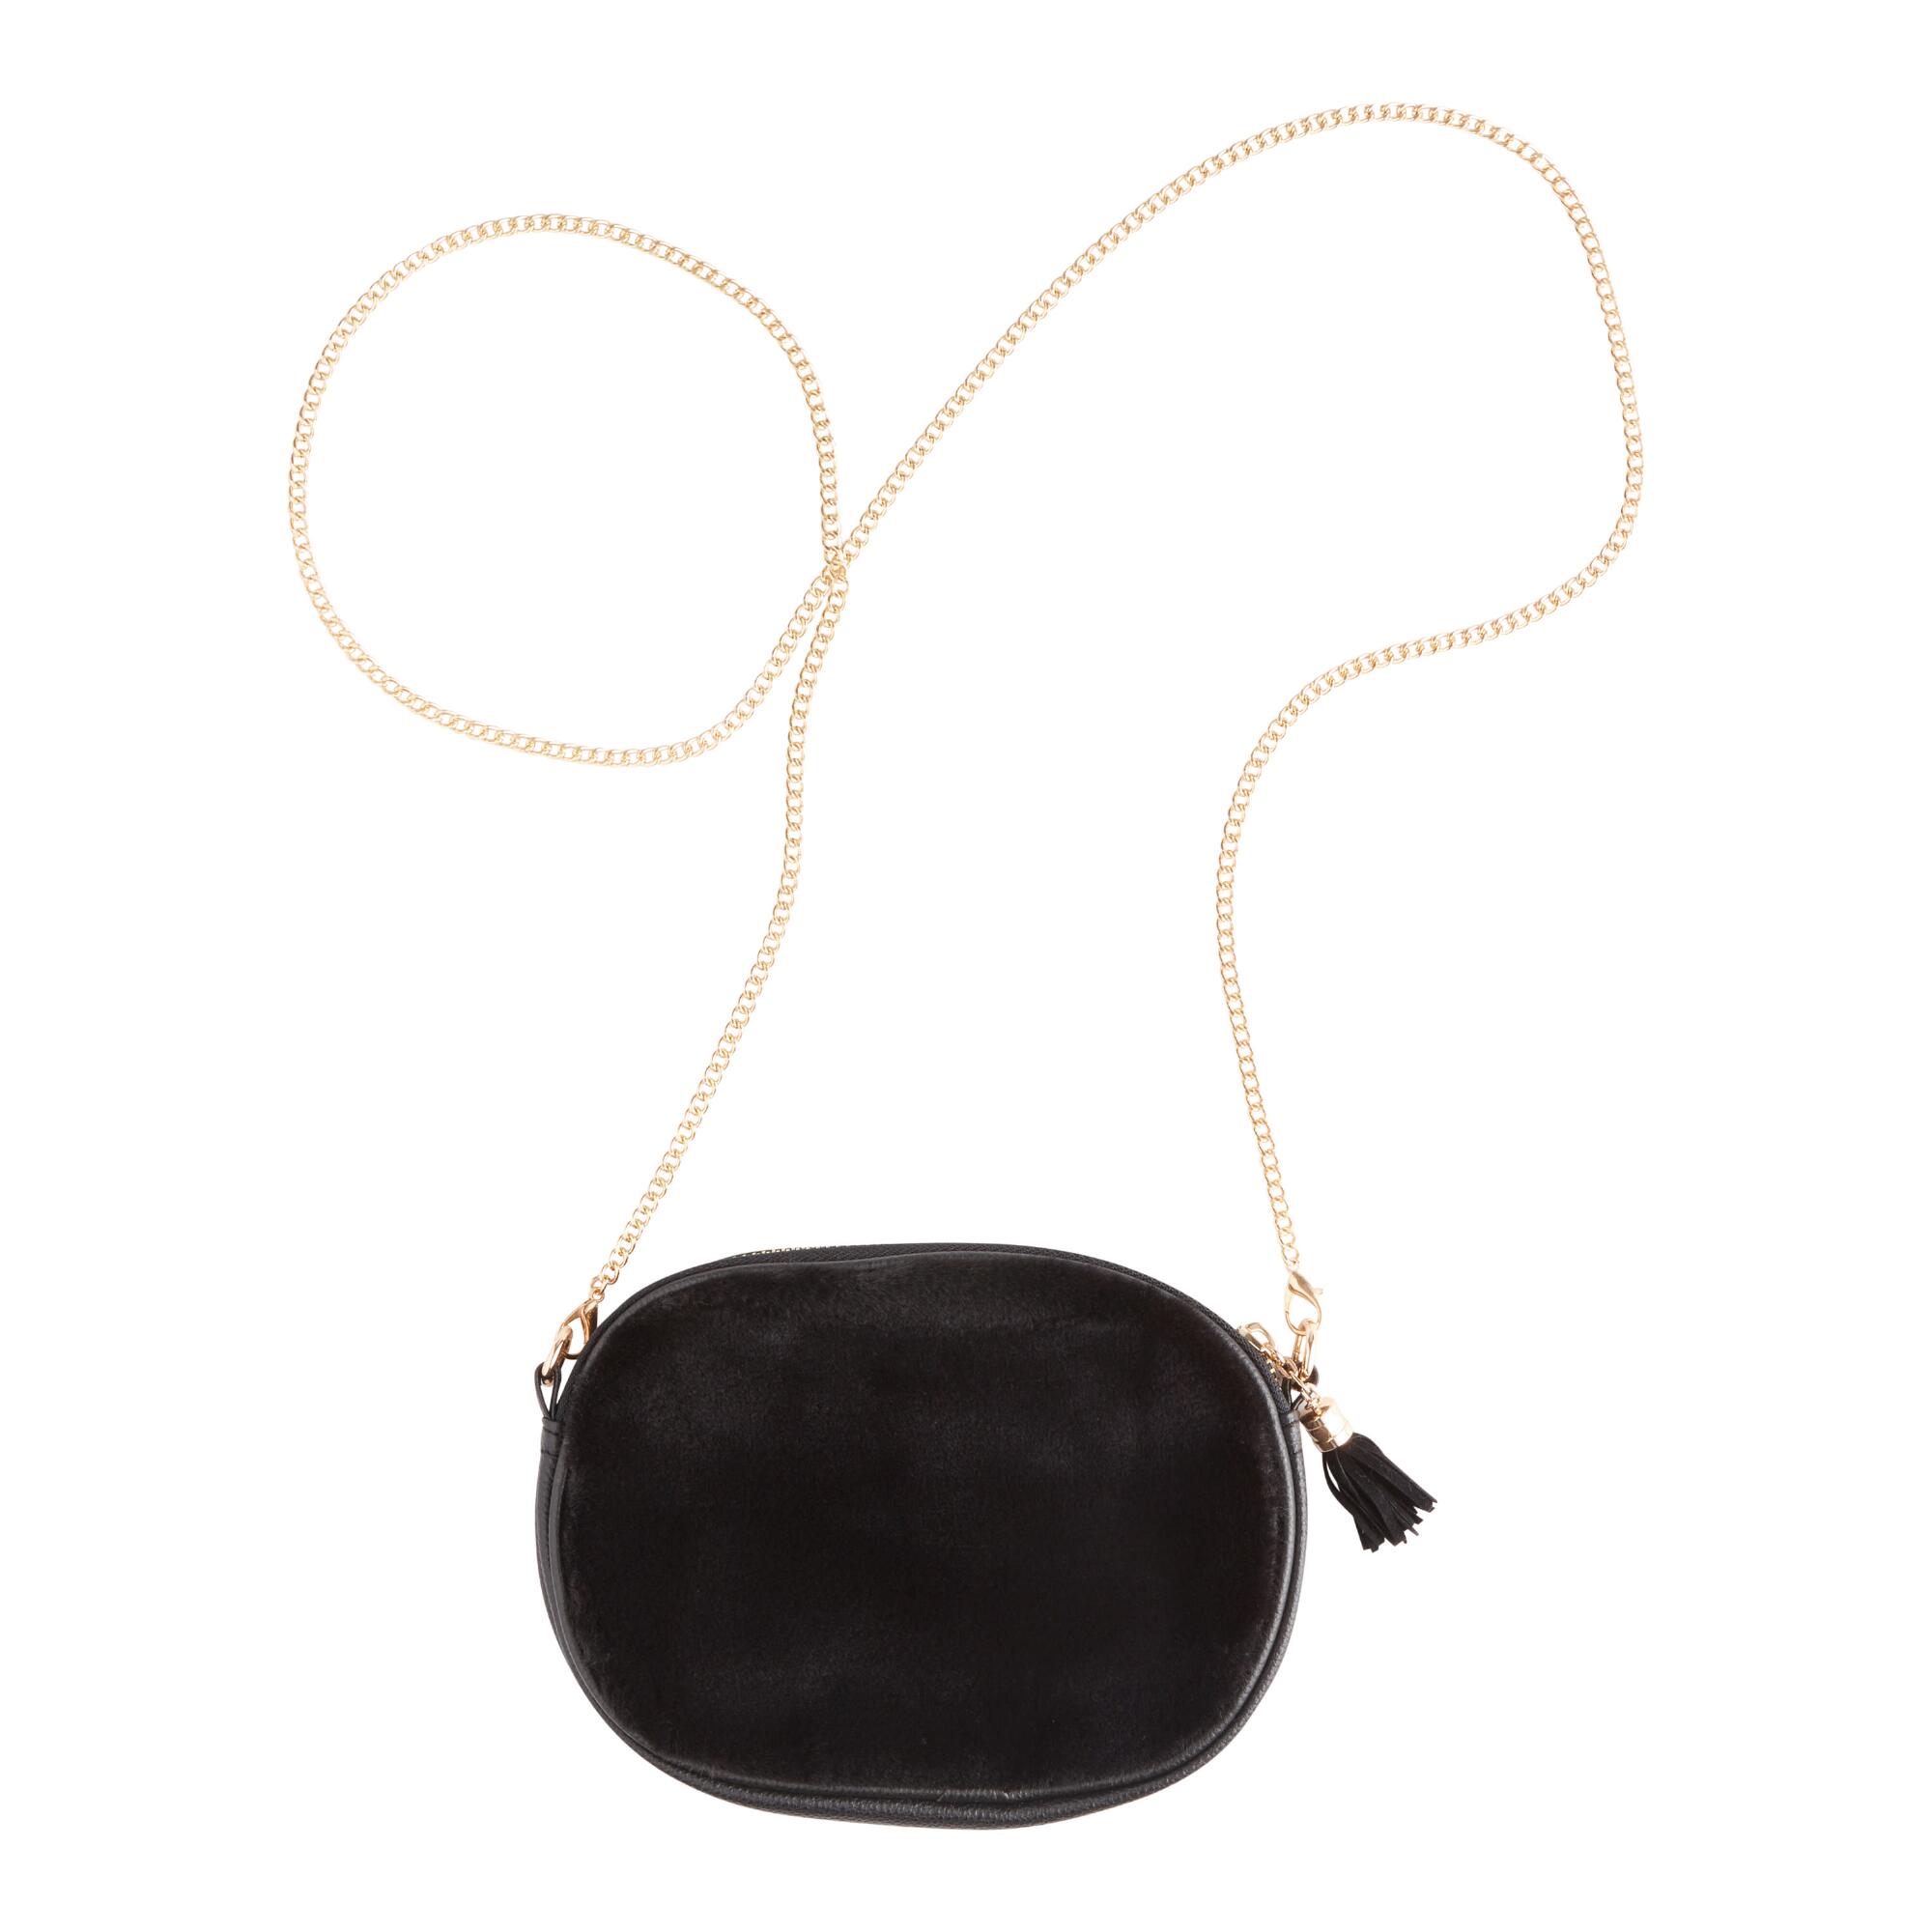 Black Faux Fur Crossbody Bag With Chain Strap - Polyester by World Market